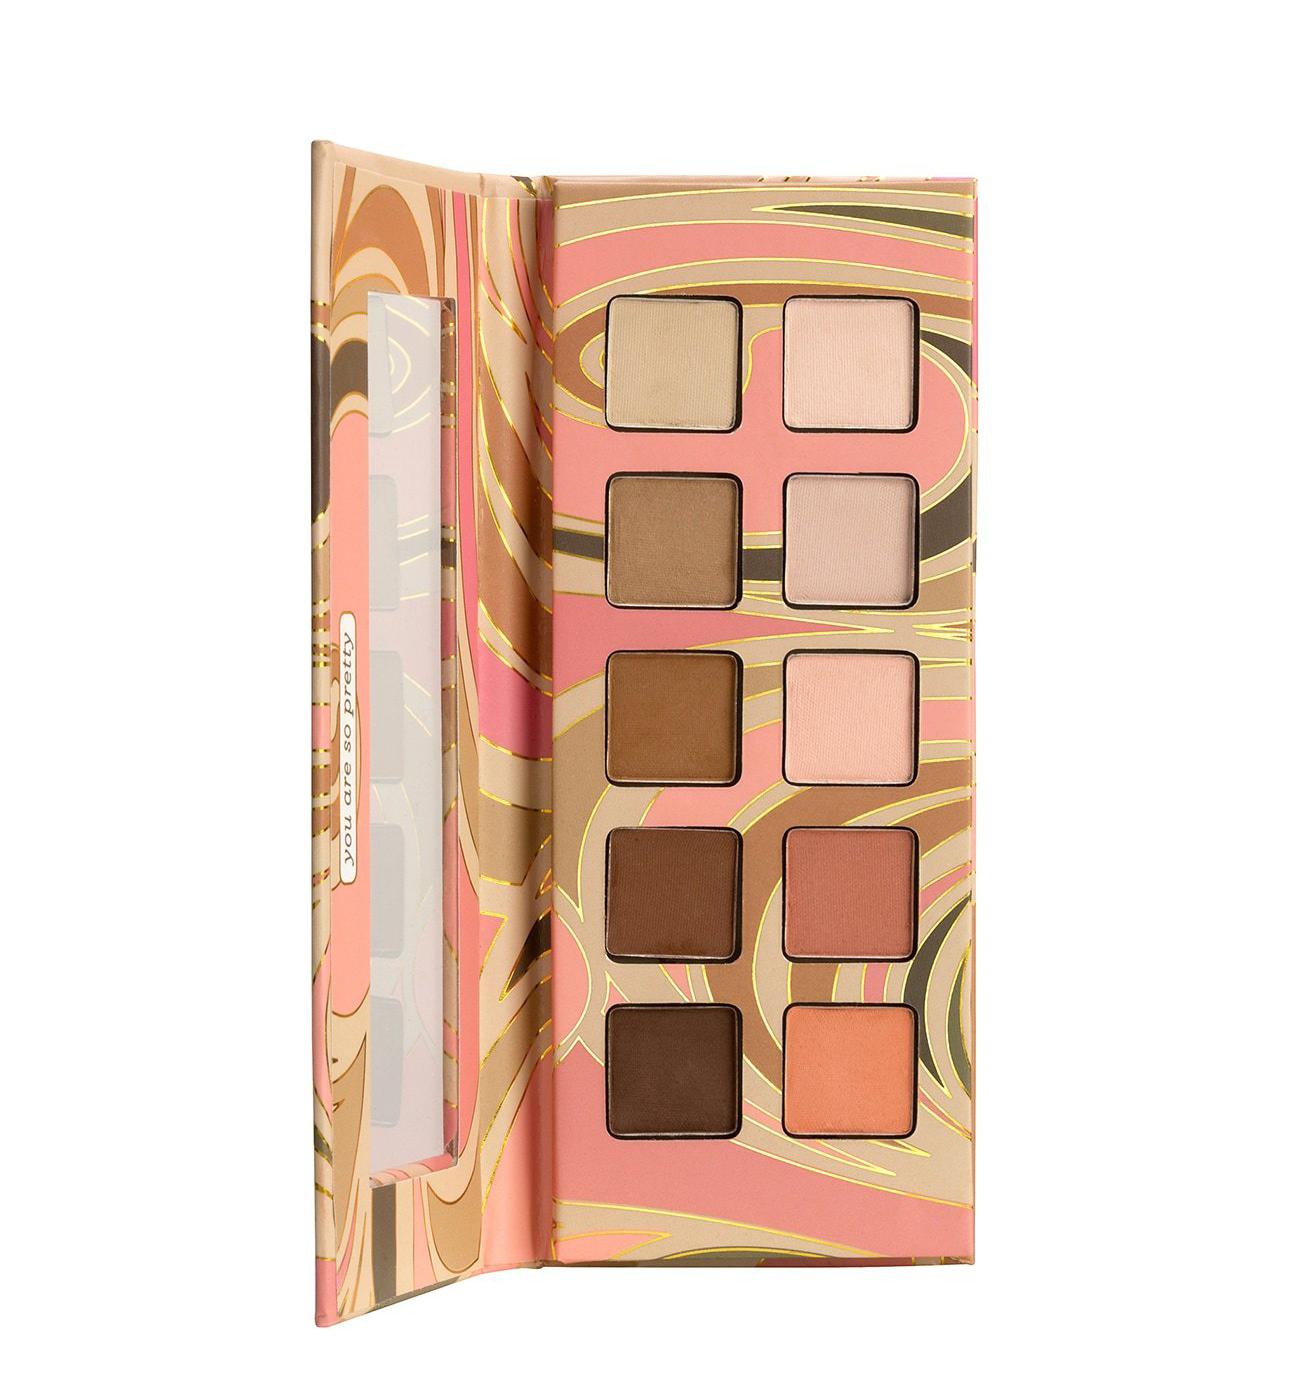 Pacifica Pink Nudes Mineral Eye Shadow Palette; image 3 of 3